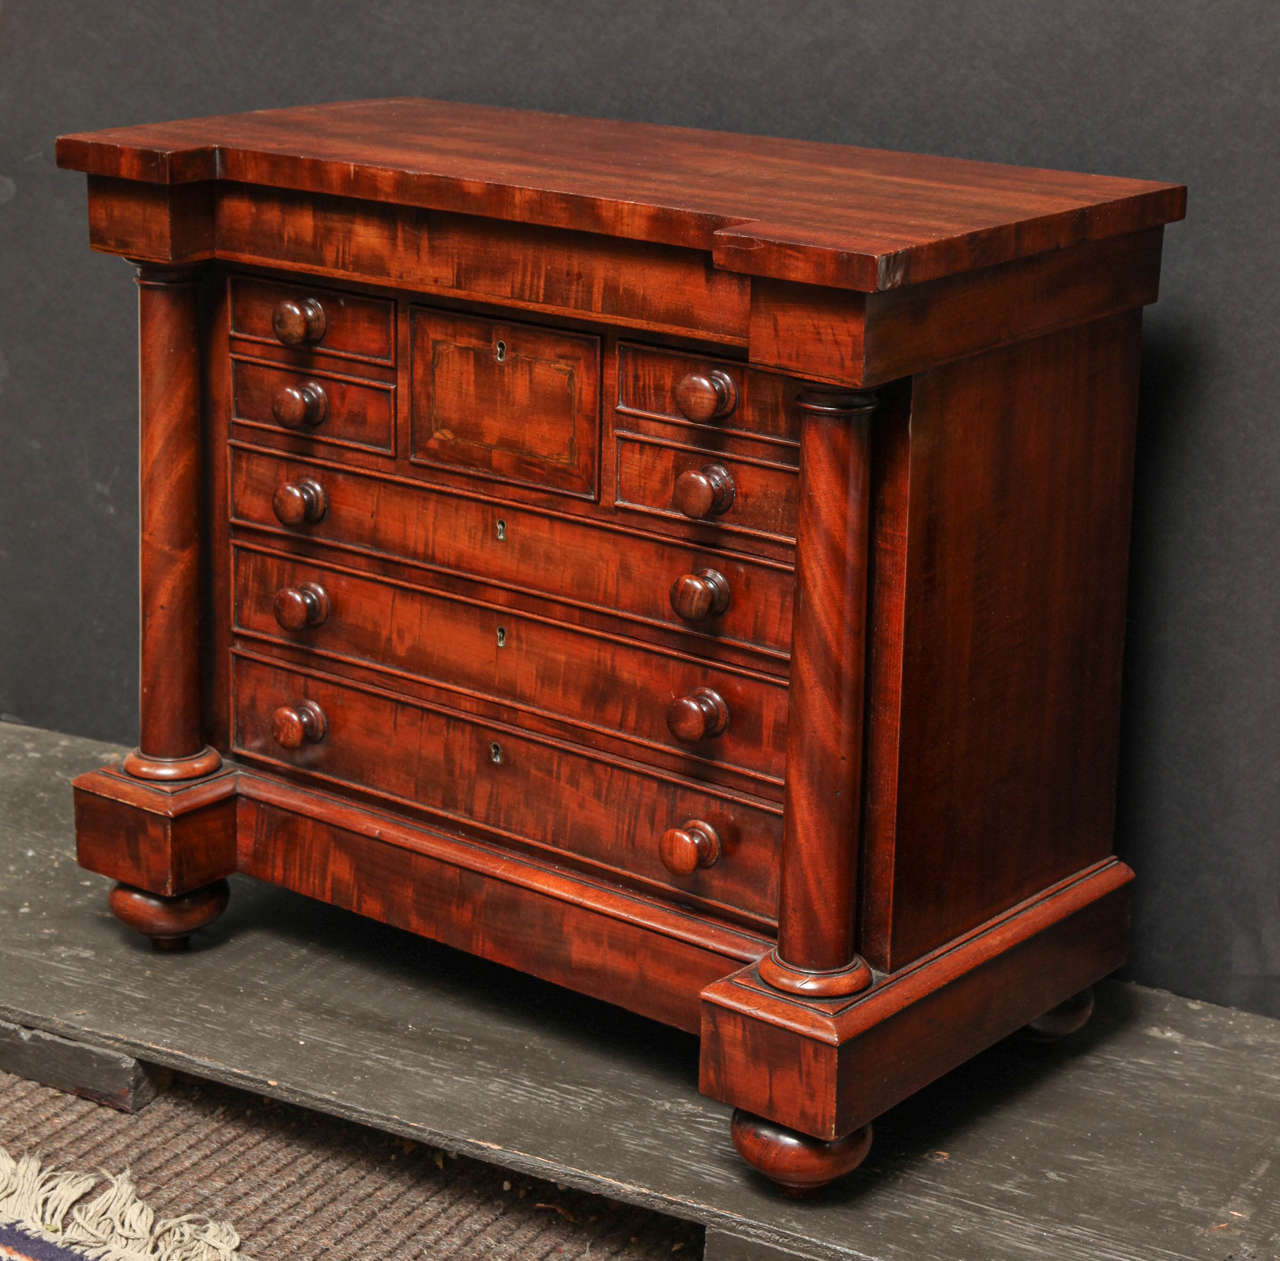 A fine William IV figured mahogany miniature chest of drawers with columns flanking an assortment of small and large drawers, on top-form feet.